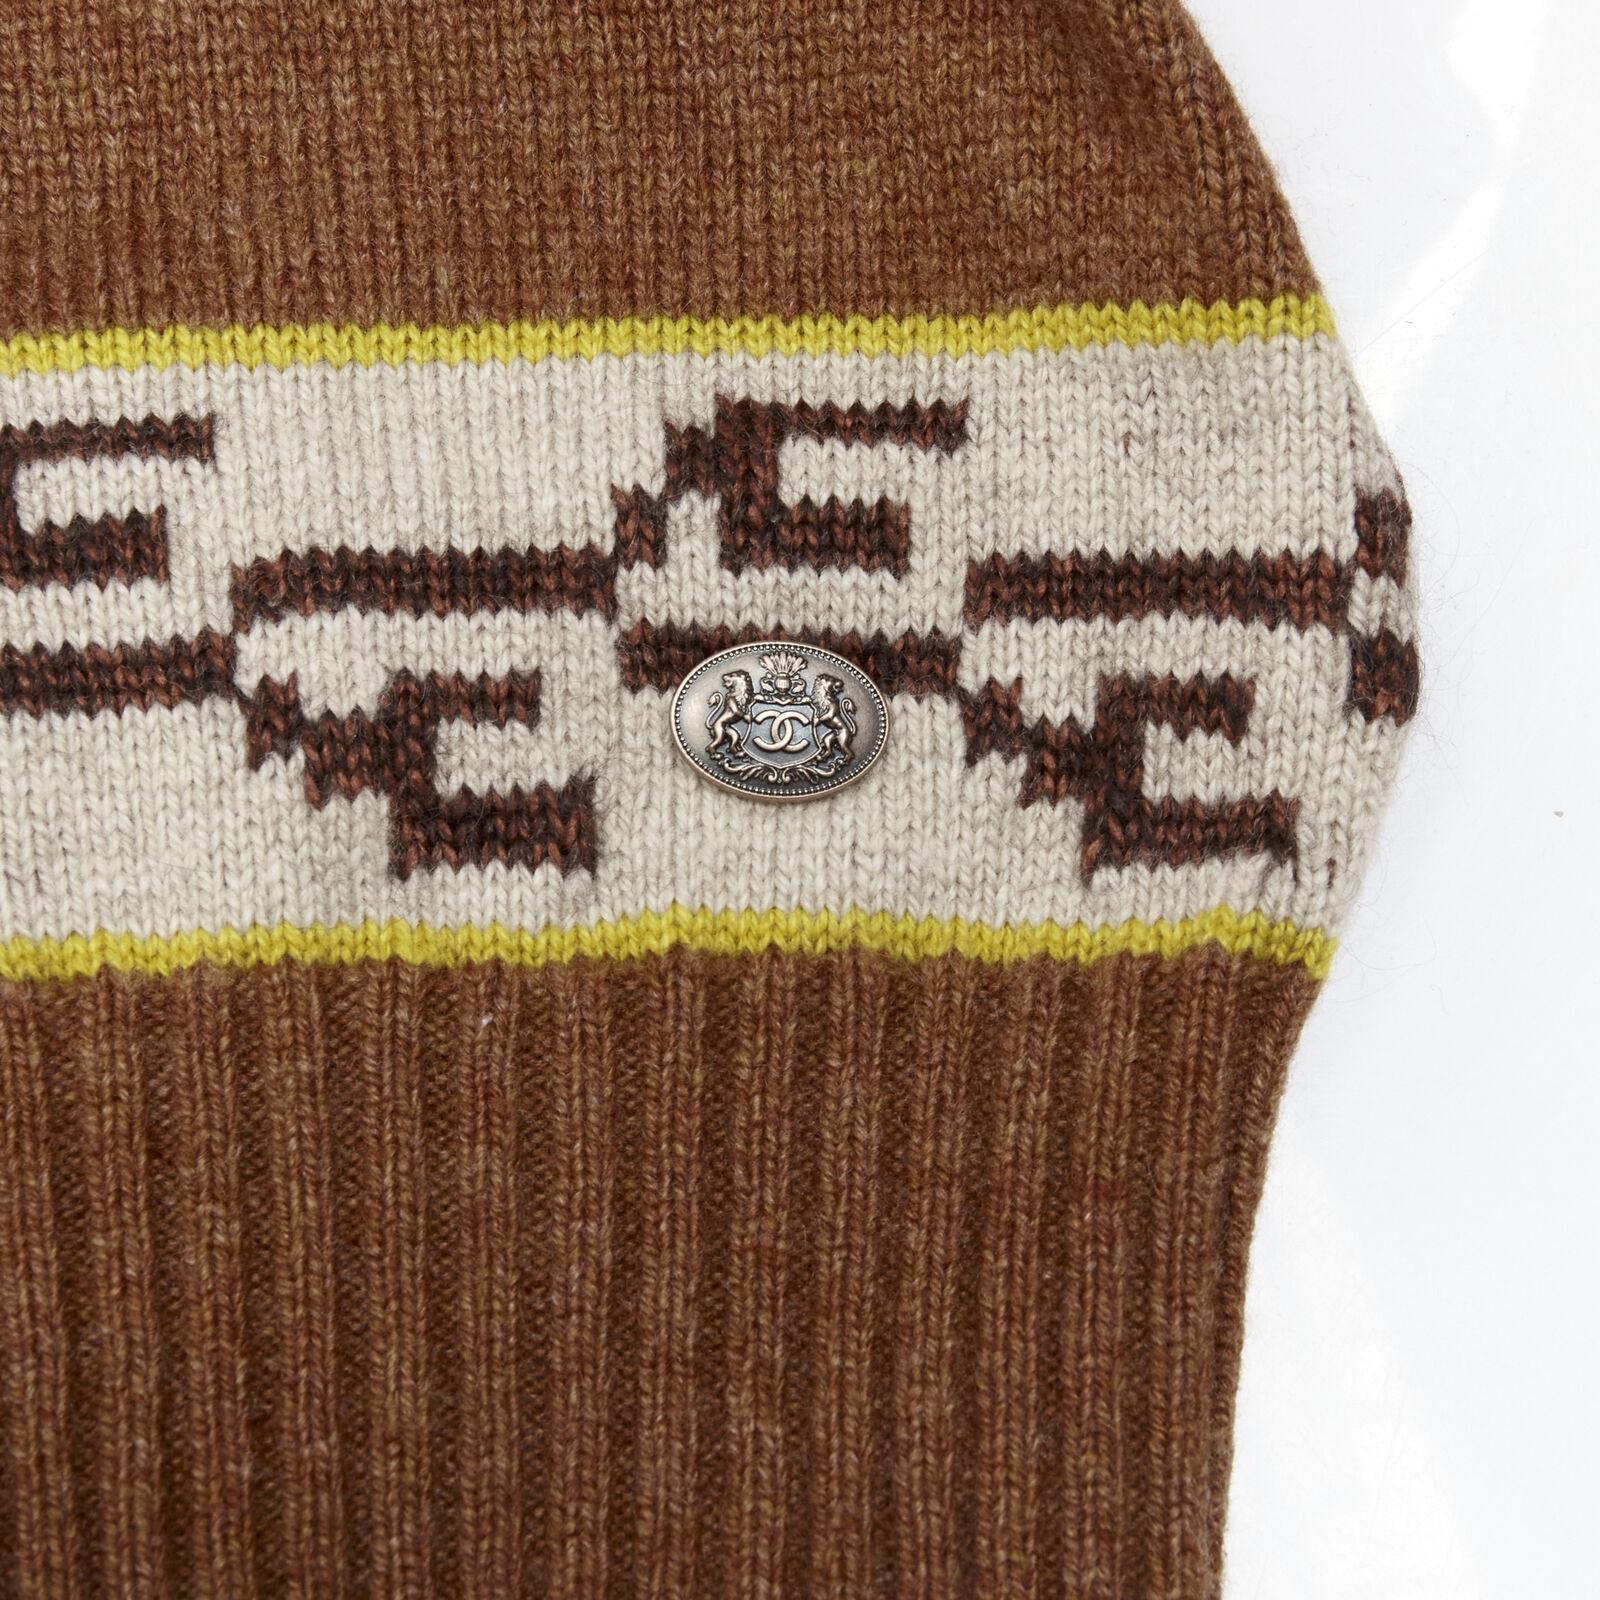 CHANEL 95% cashmere brown yellow CC logo intarsia turtleneck sweater FR42 XL
Reference: TGAS/C01623
Brand: Chanel
Designer: Karl Lagerfeld
Material: Cashmere, Wool
Color: Brown
Pattern: Abstract
Closure: Pullover
Extra Details: Copper tone CC logo